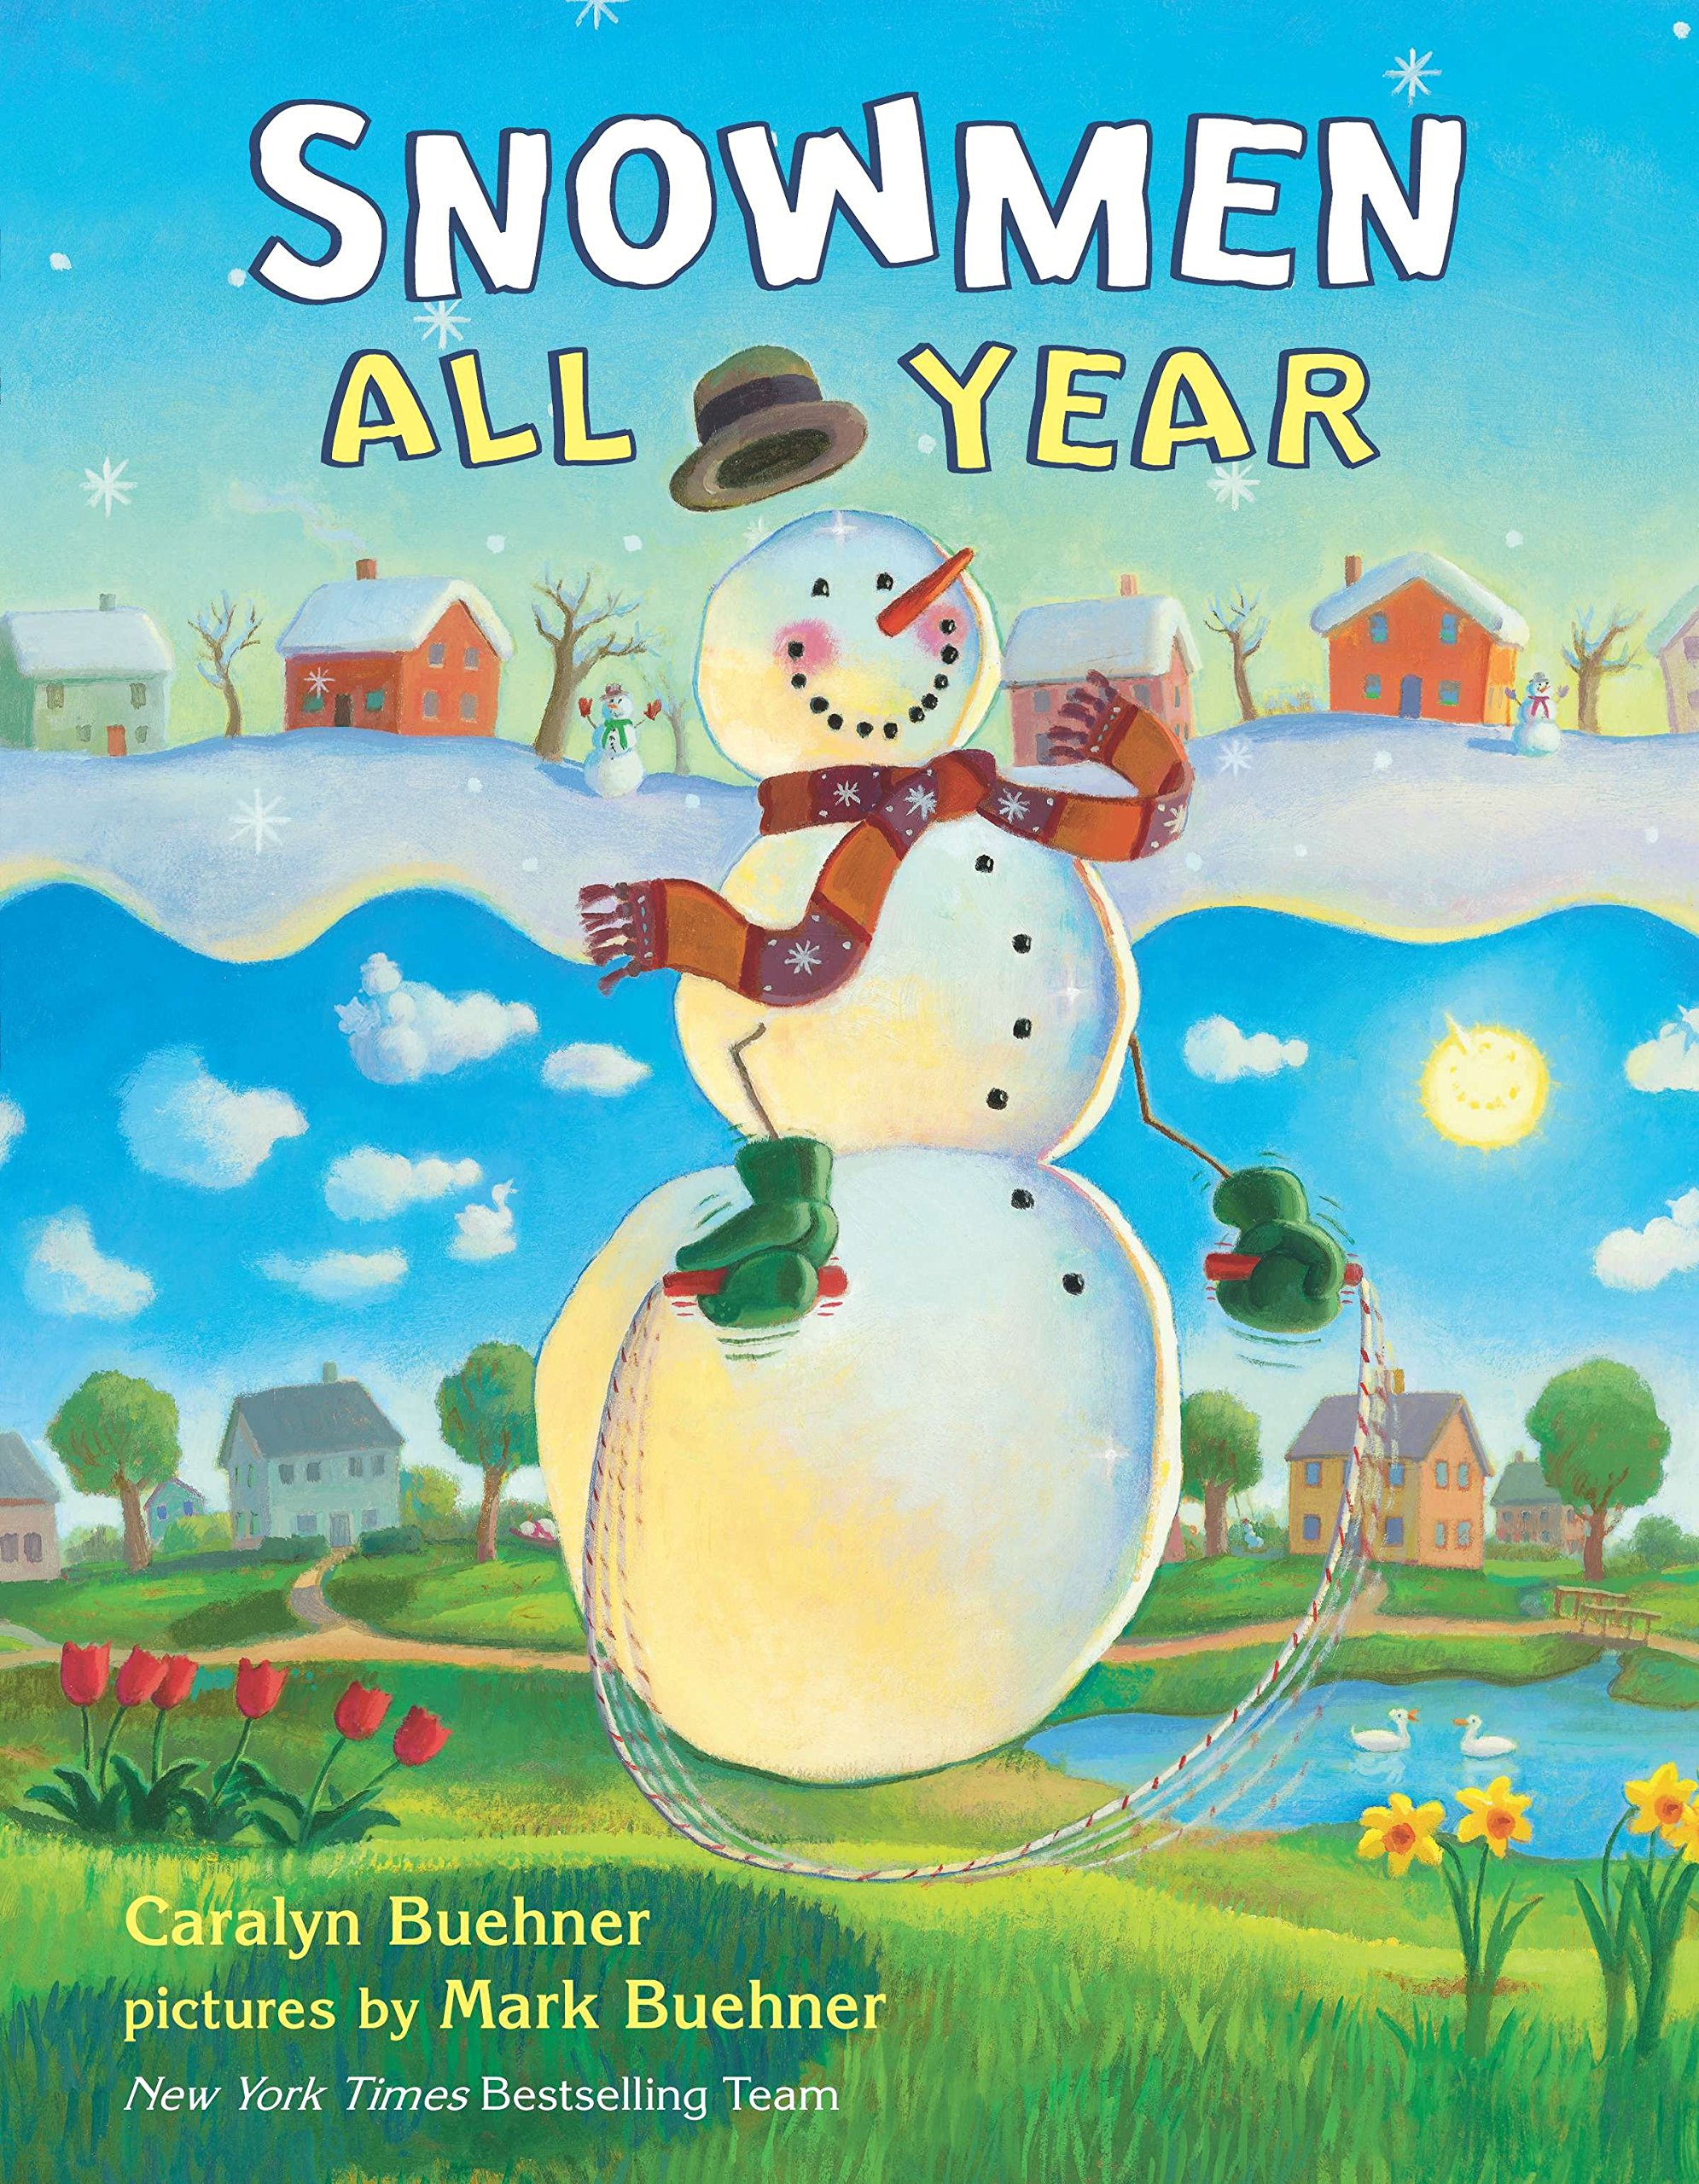 speech and language teaching concepts for Snowmen All Year in speech therapy​ ​